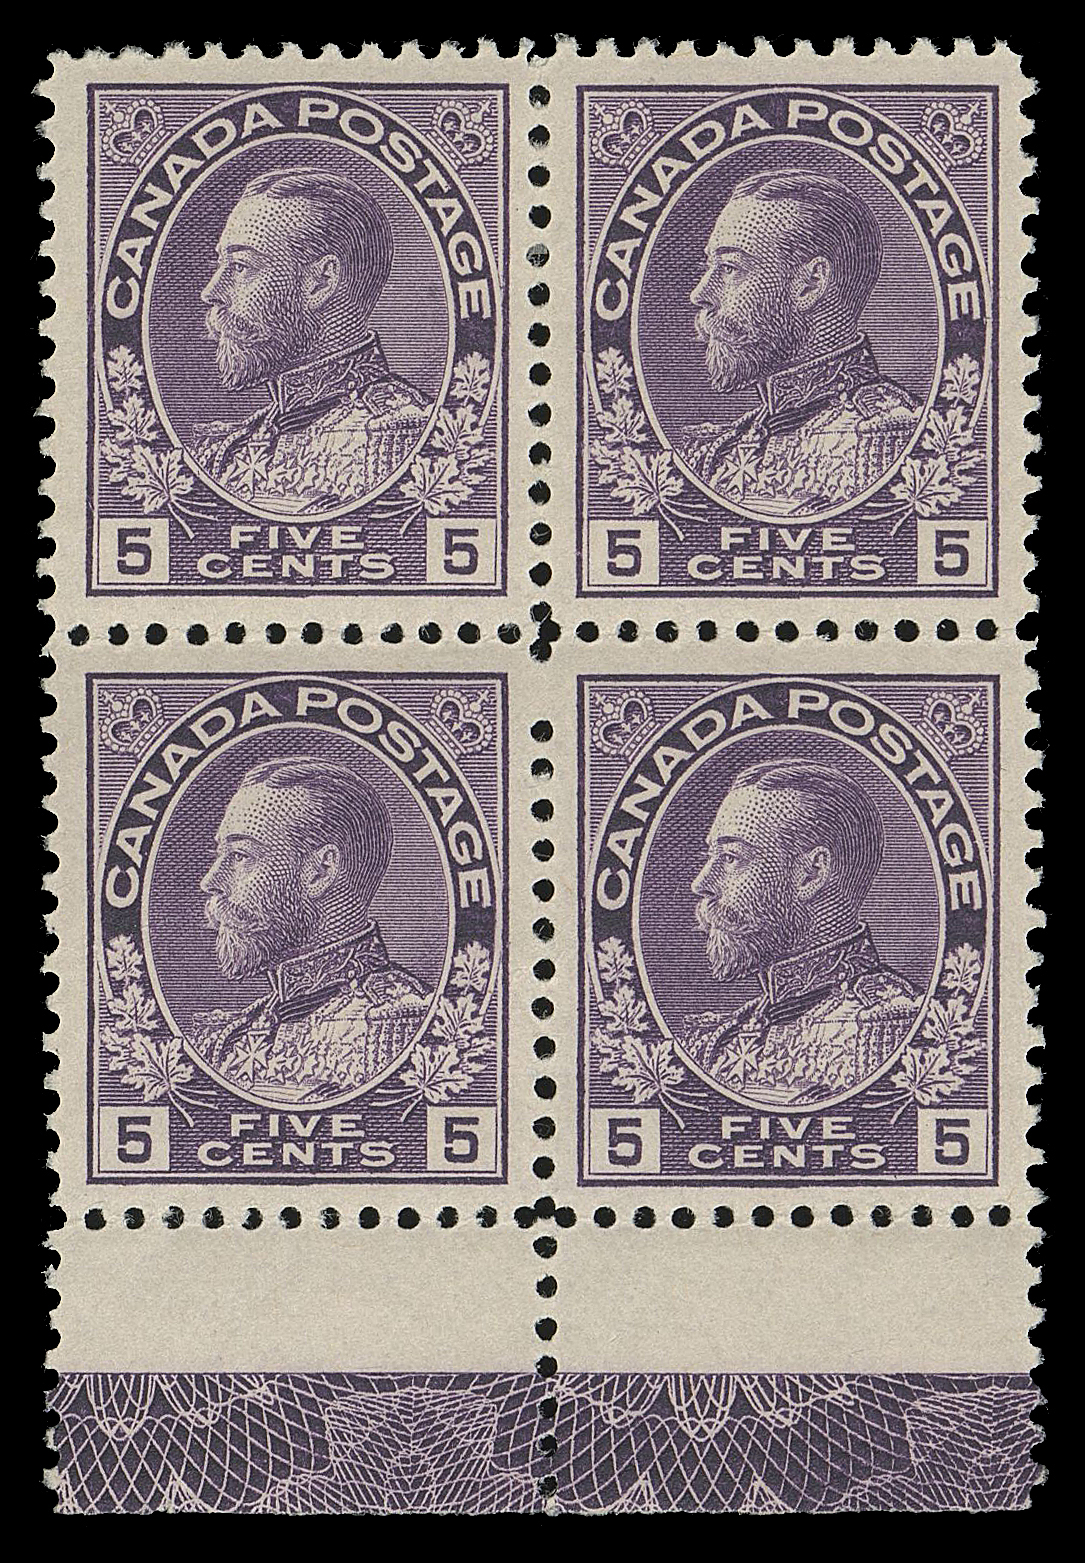 ADMIRAL STAMPS  112,An extremely well centered mint block with lovely bright colour, displaying superb full strength Type D inverted lathework - as strong as it gets, couple light gum creases on lower NH pair, very lightly hinged on top pair, VF